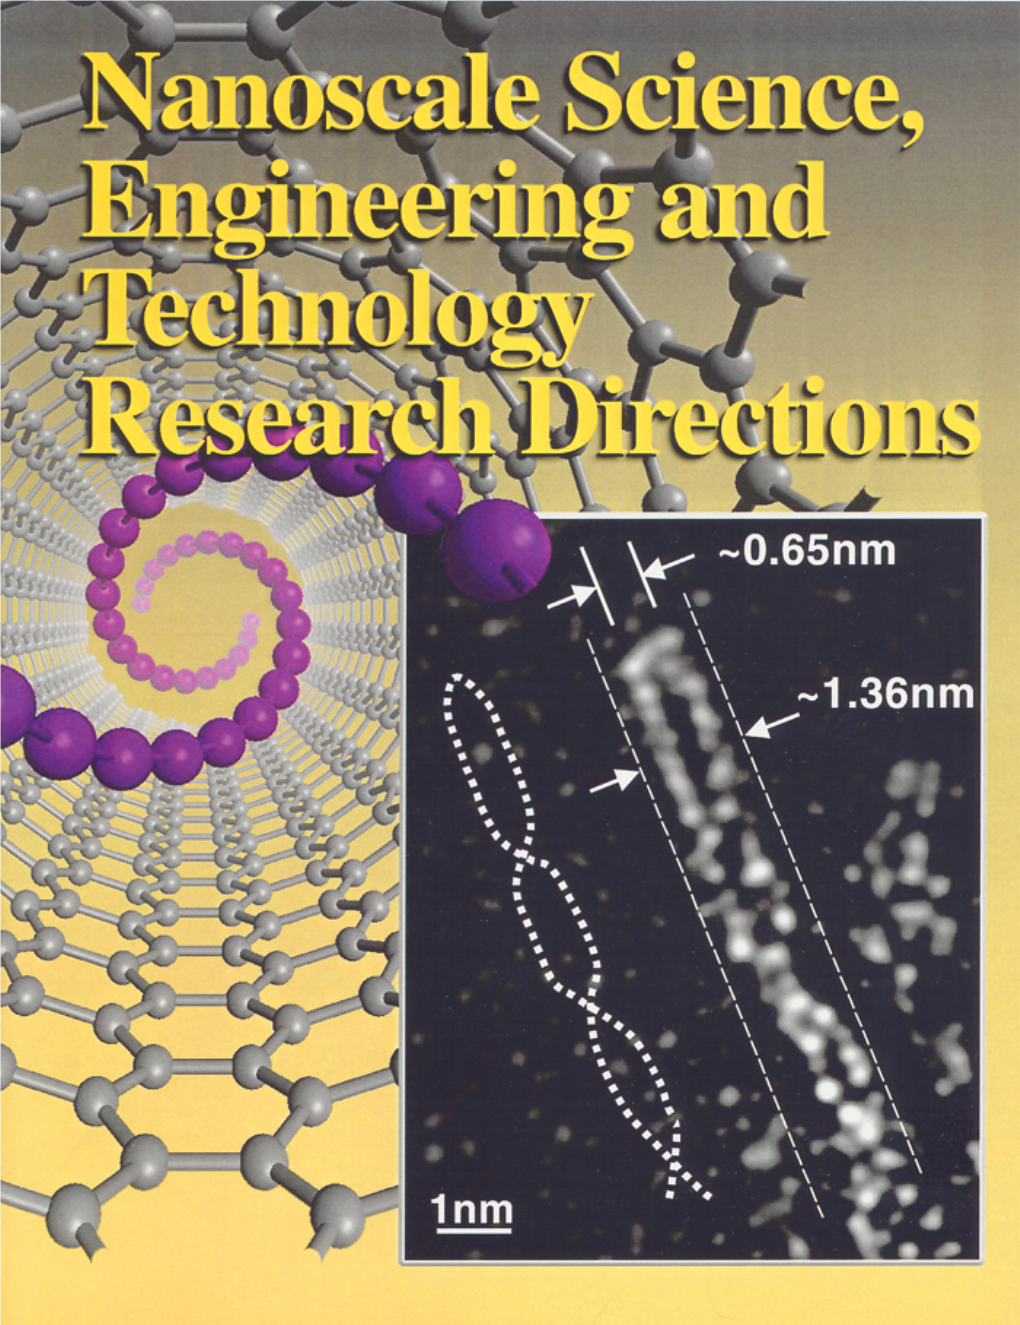 Nanoscale Science, Engineering and Technology